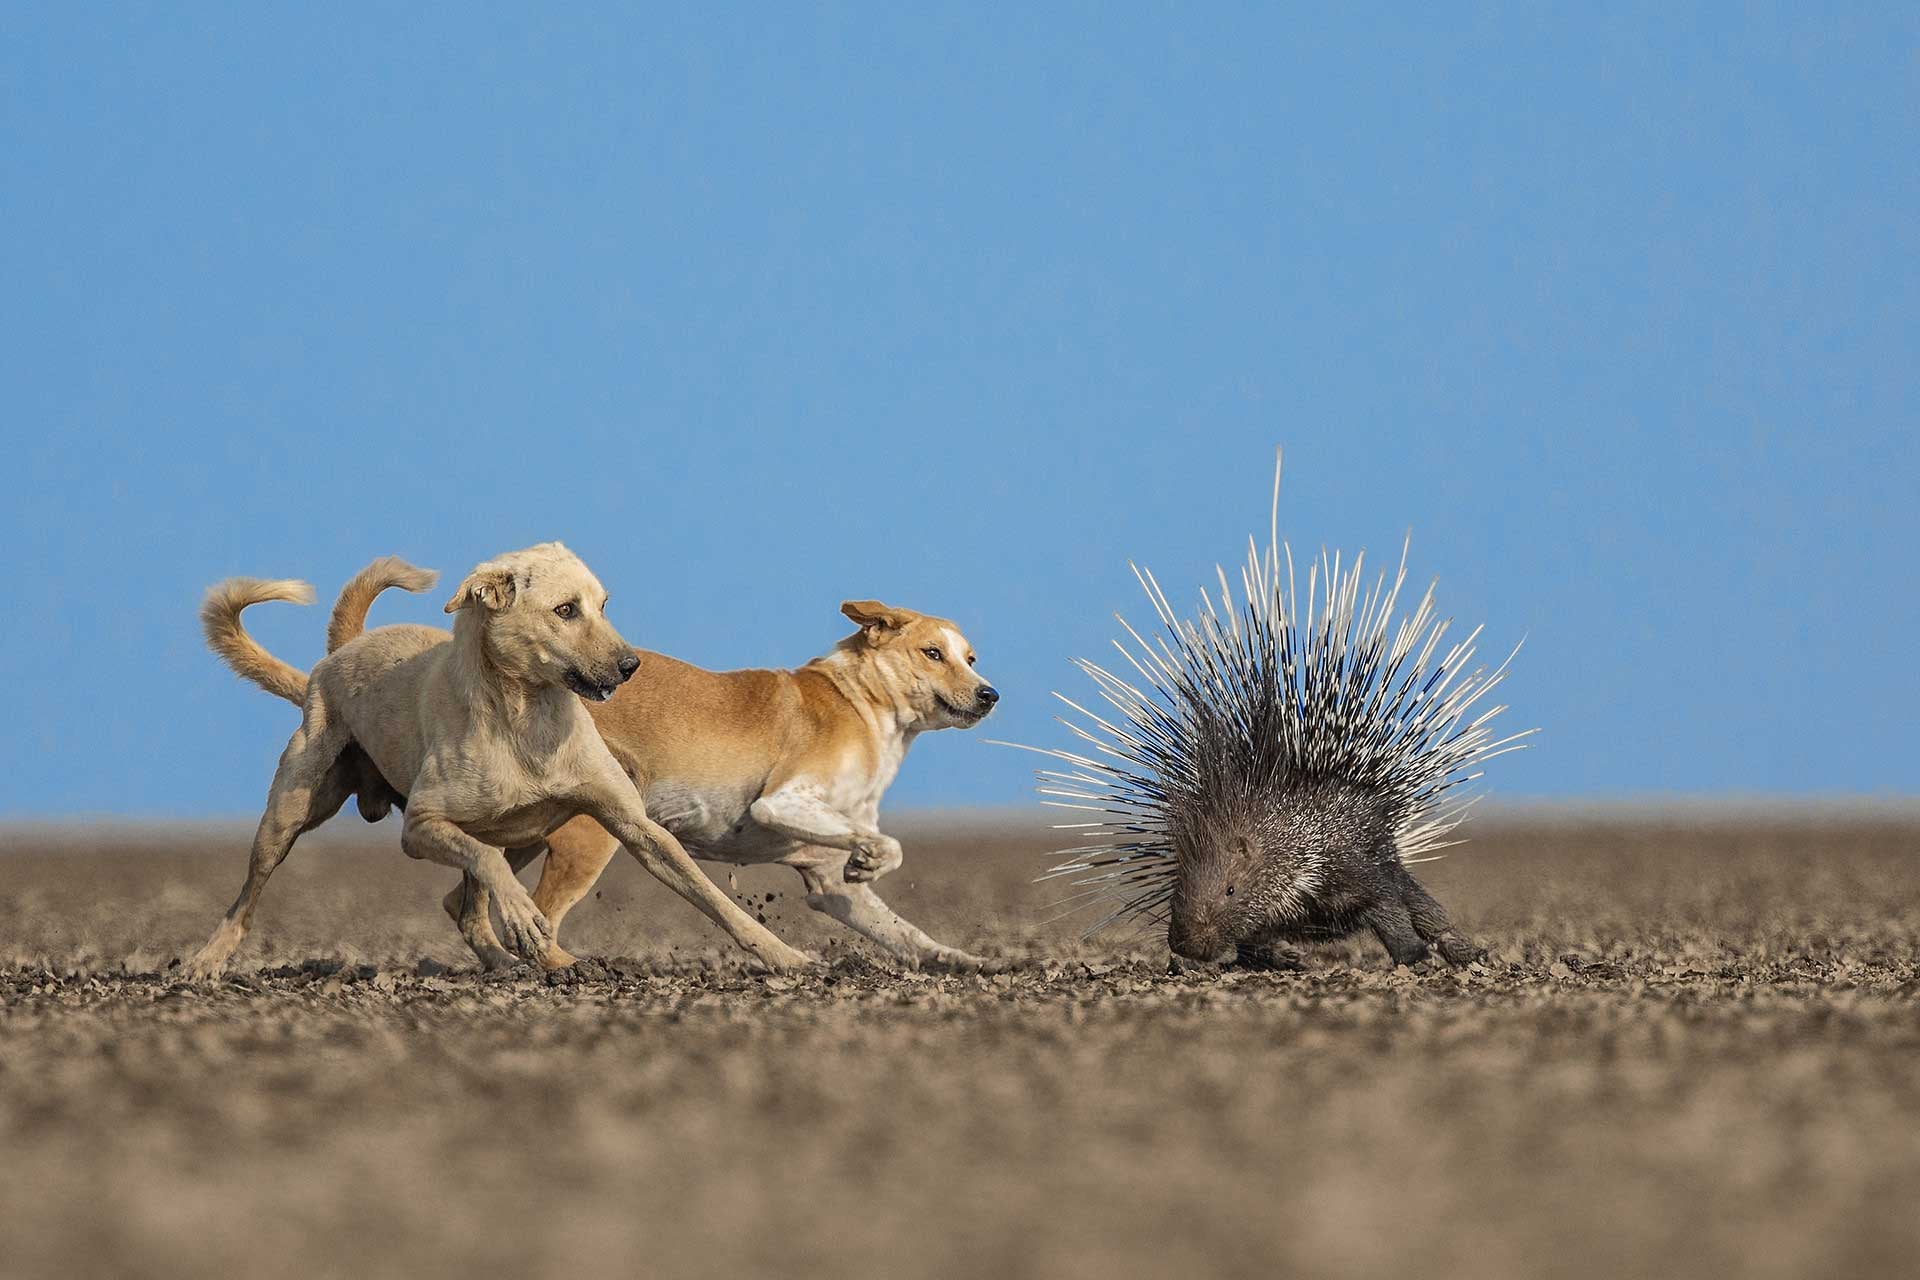 Gutsy Dogs, Dueling Birds, and Other Award-Winning Animal Photos